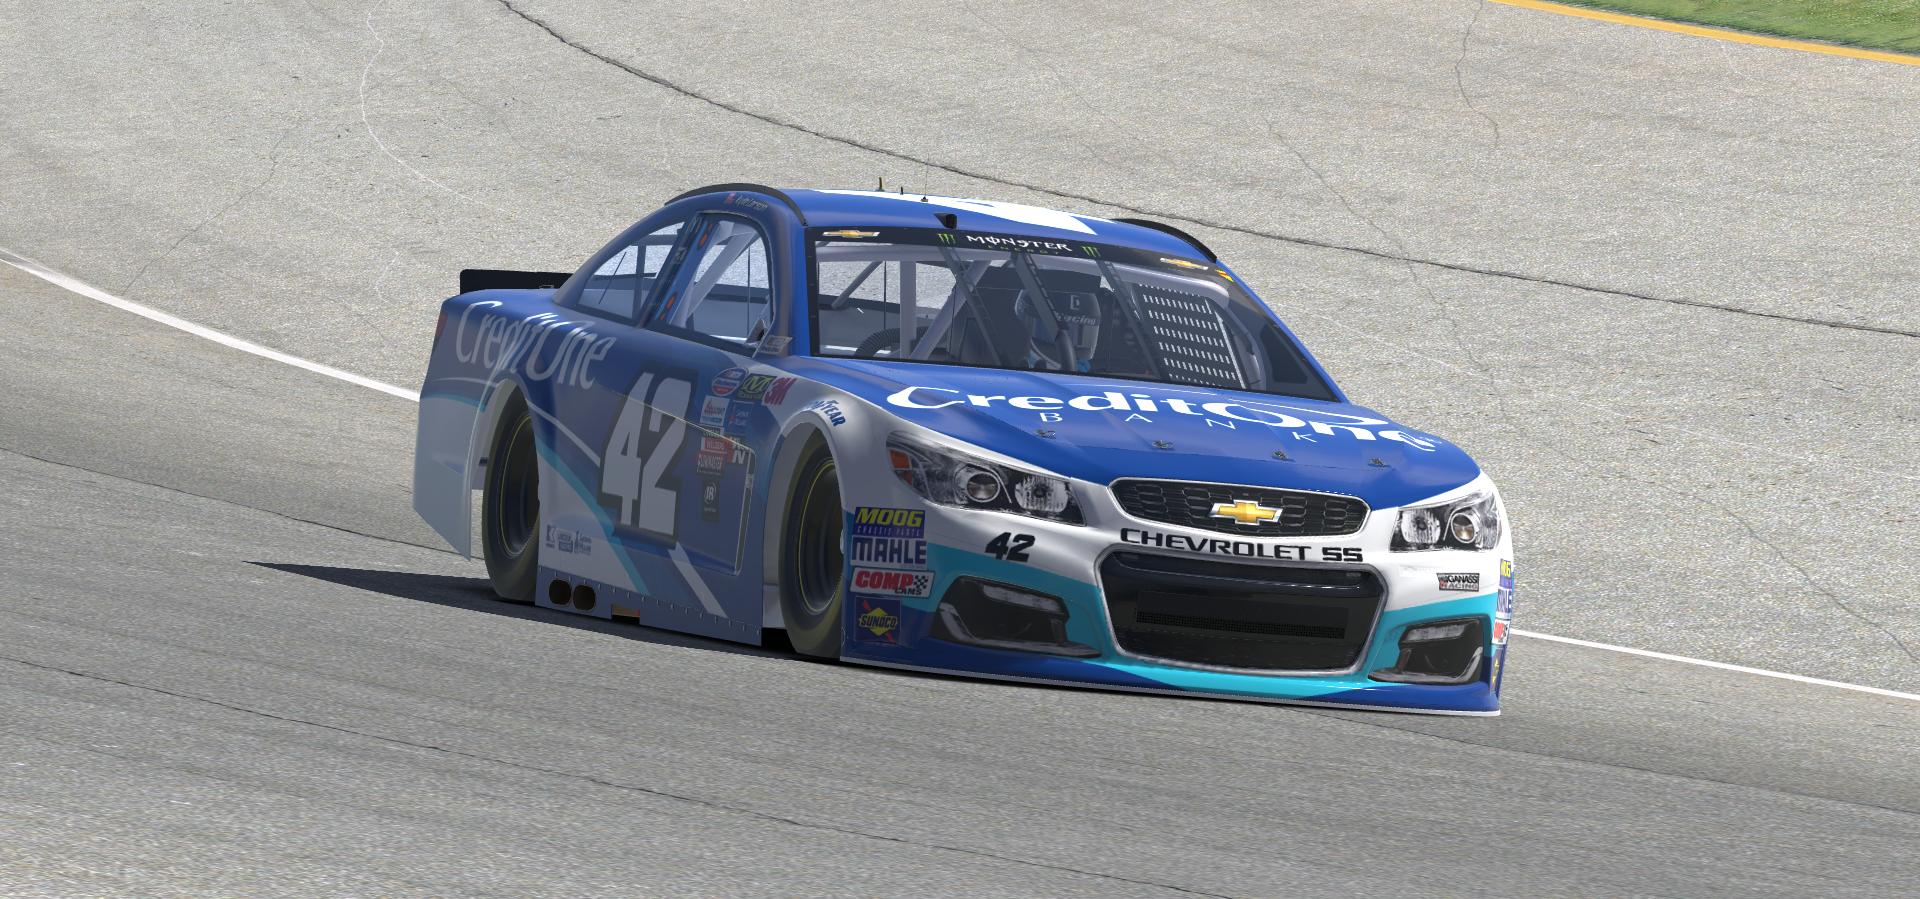 Preview of 2018 Kyle Larson Credit One Bank Chevy by Doug DeNise